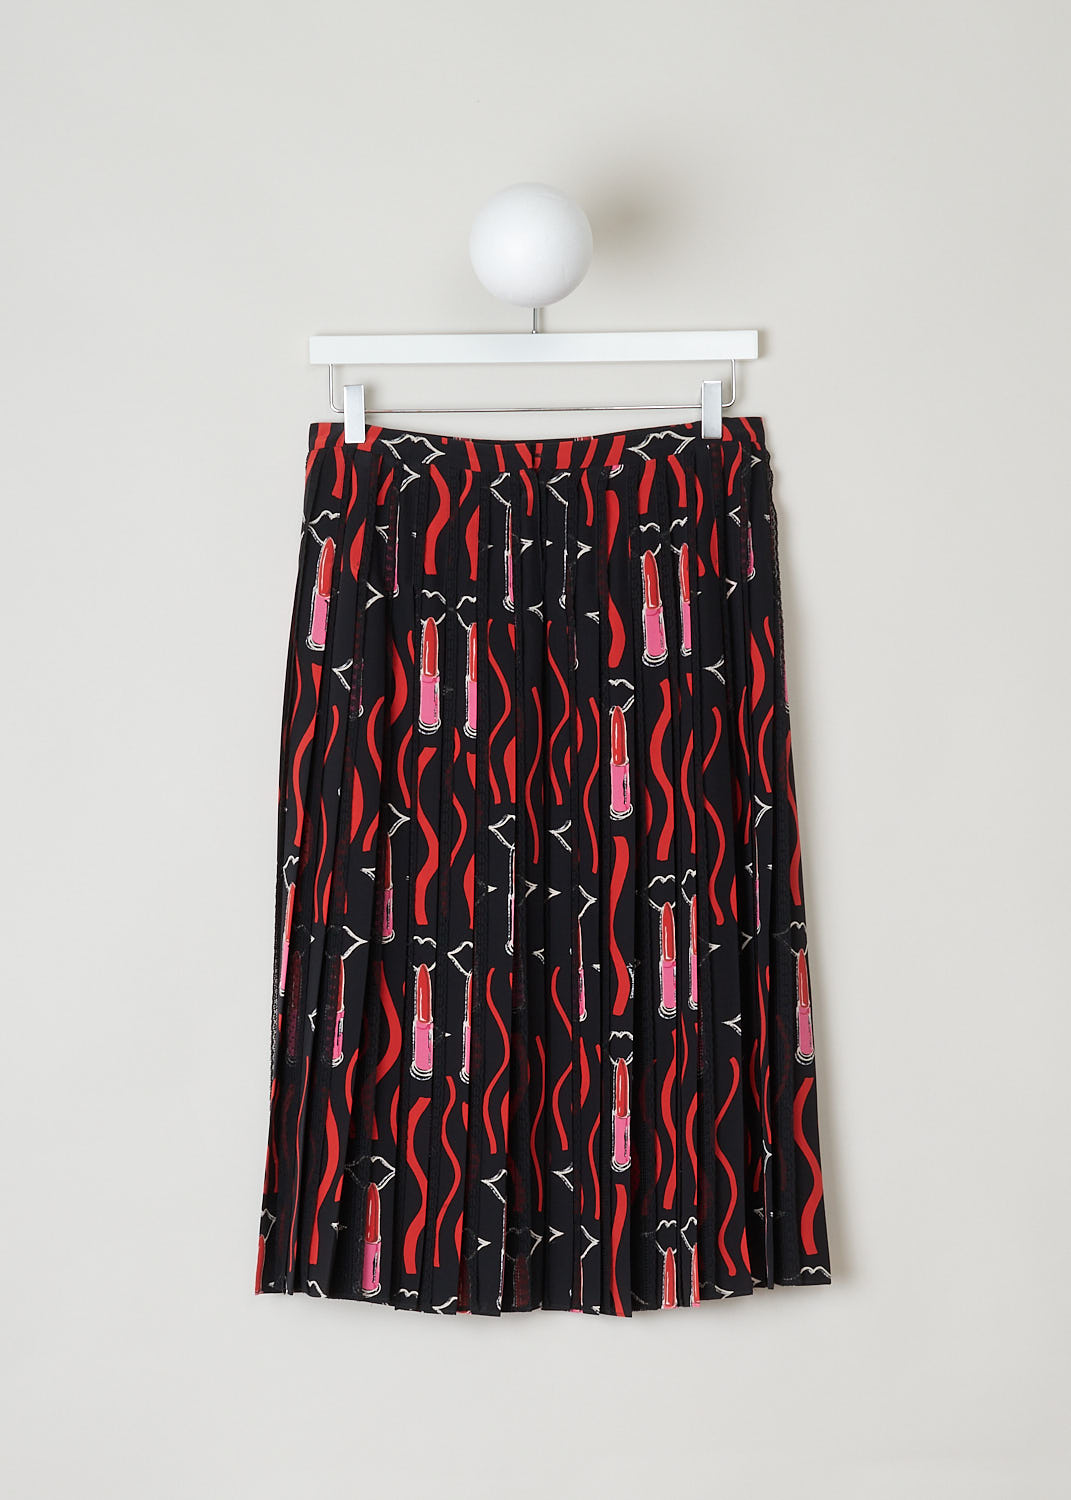 VALENTINO, MULTICOLORED PLEATED SKIRT, PB3RA3G53NV_0D4, Black, Red, Print, Back, Beautifully pleated skirt with multicolored lipstick print. The pleats are decorated with scalloped eyelash trims. The skirt comes with a concealed snap button closure in the back. The skirt is fully lined. 